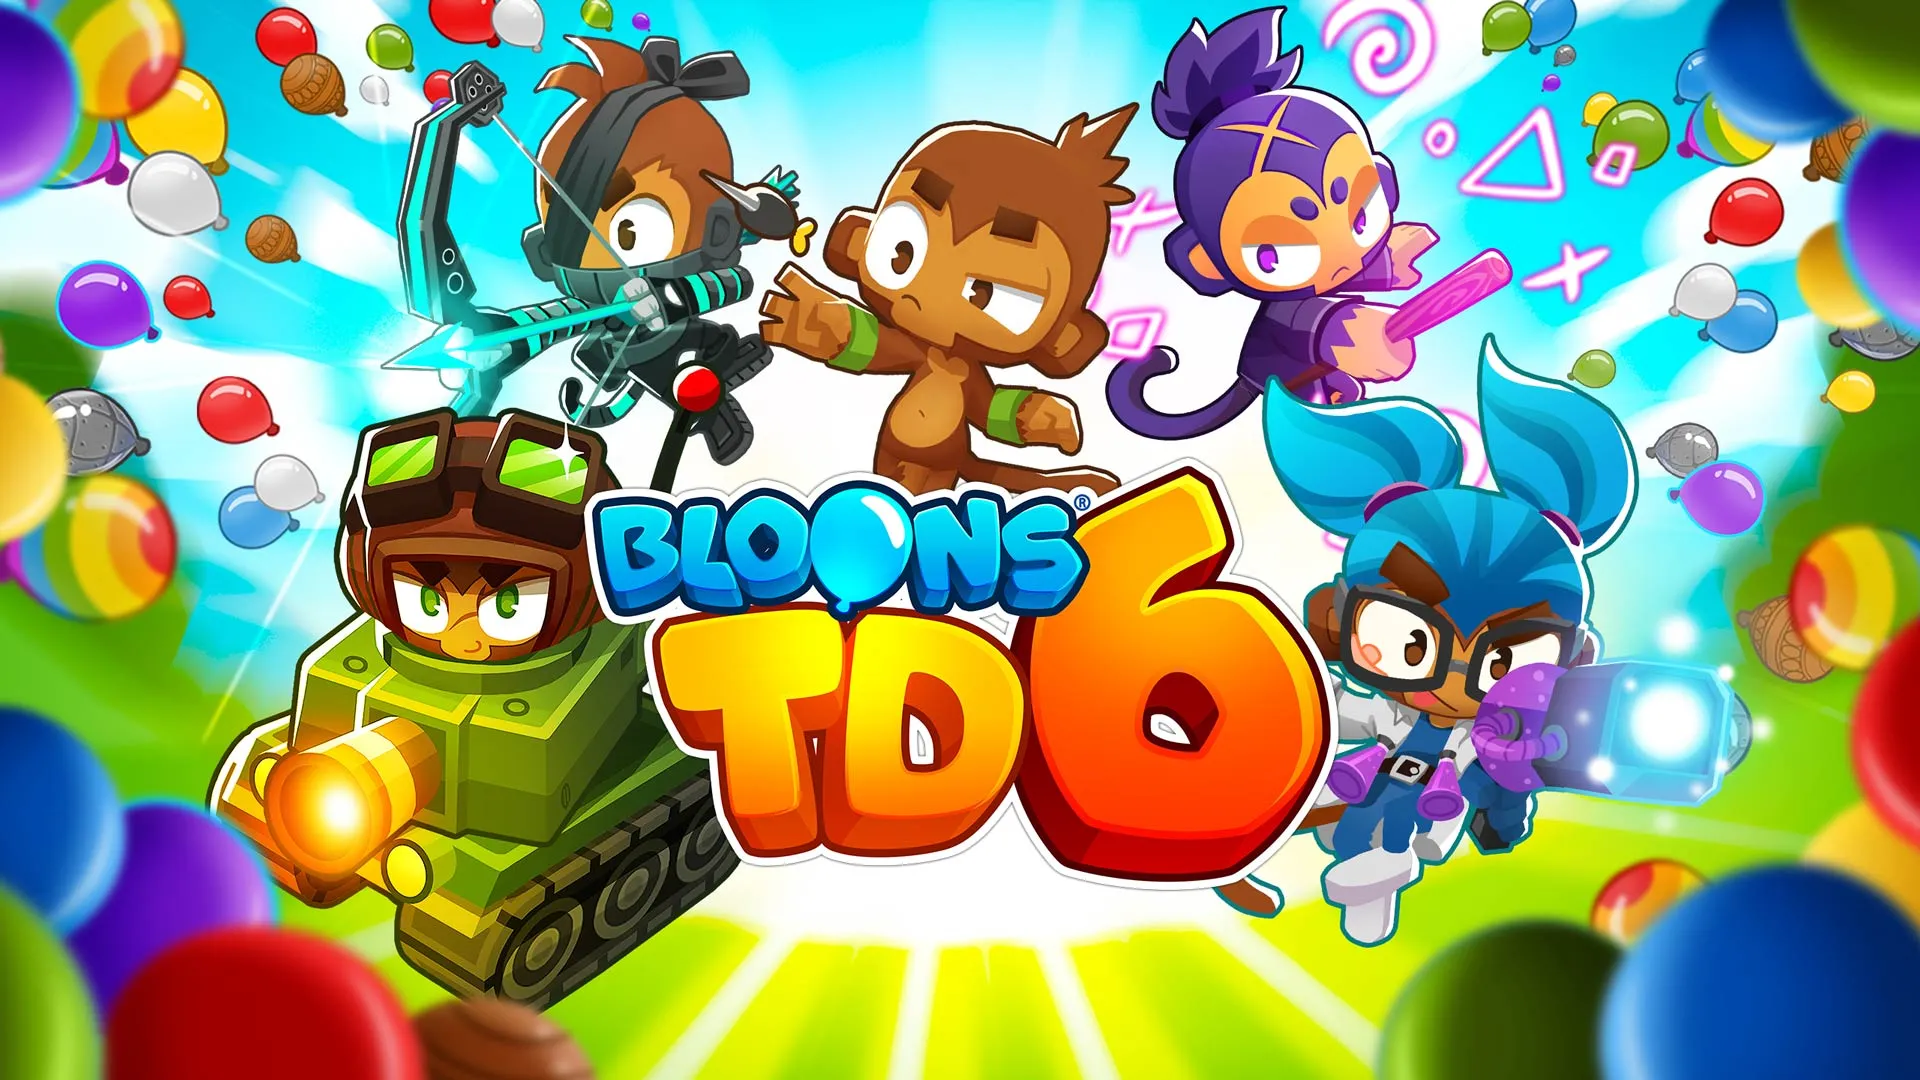 Bloons TD 6 free at Epic Games Store